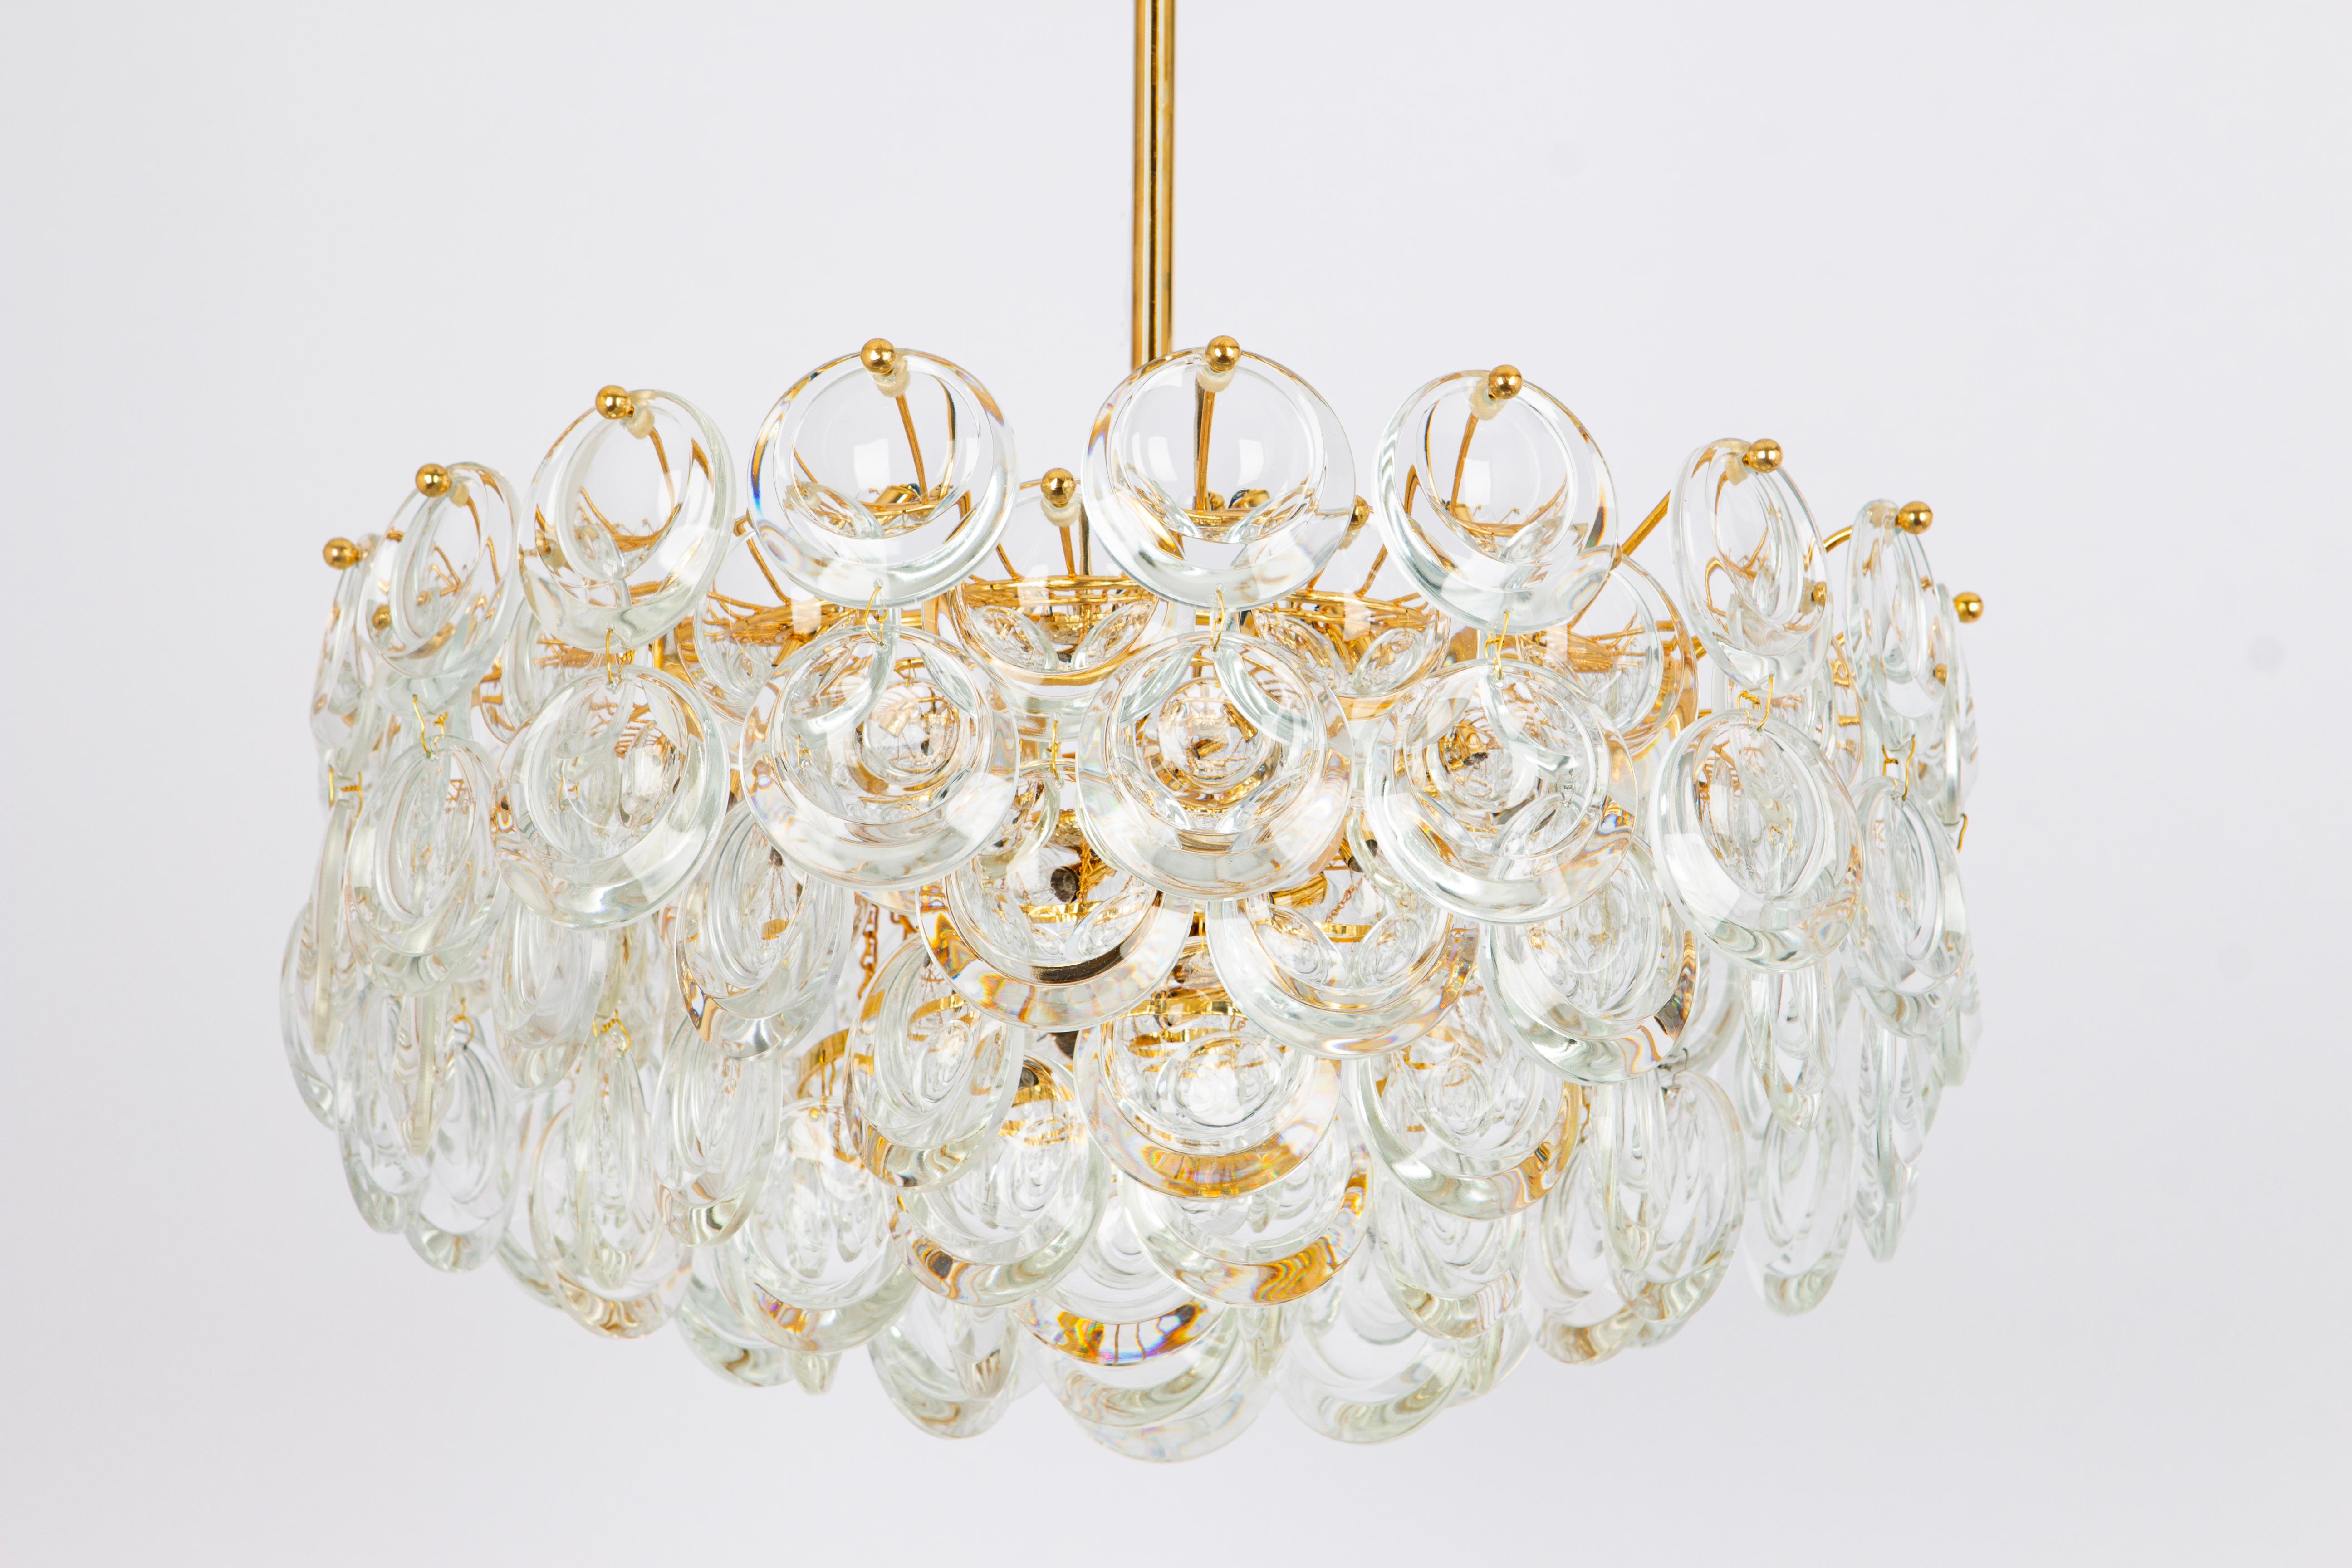 Delicate floral chandelier with crystal glass and gilded brass parts made by Palwa, Sciolari Design Germany, 1970s. Featuring a multitude of crystal glasses.
Measures: Diameter 15.7